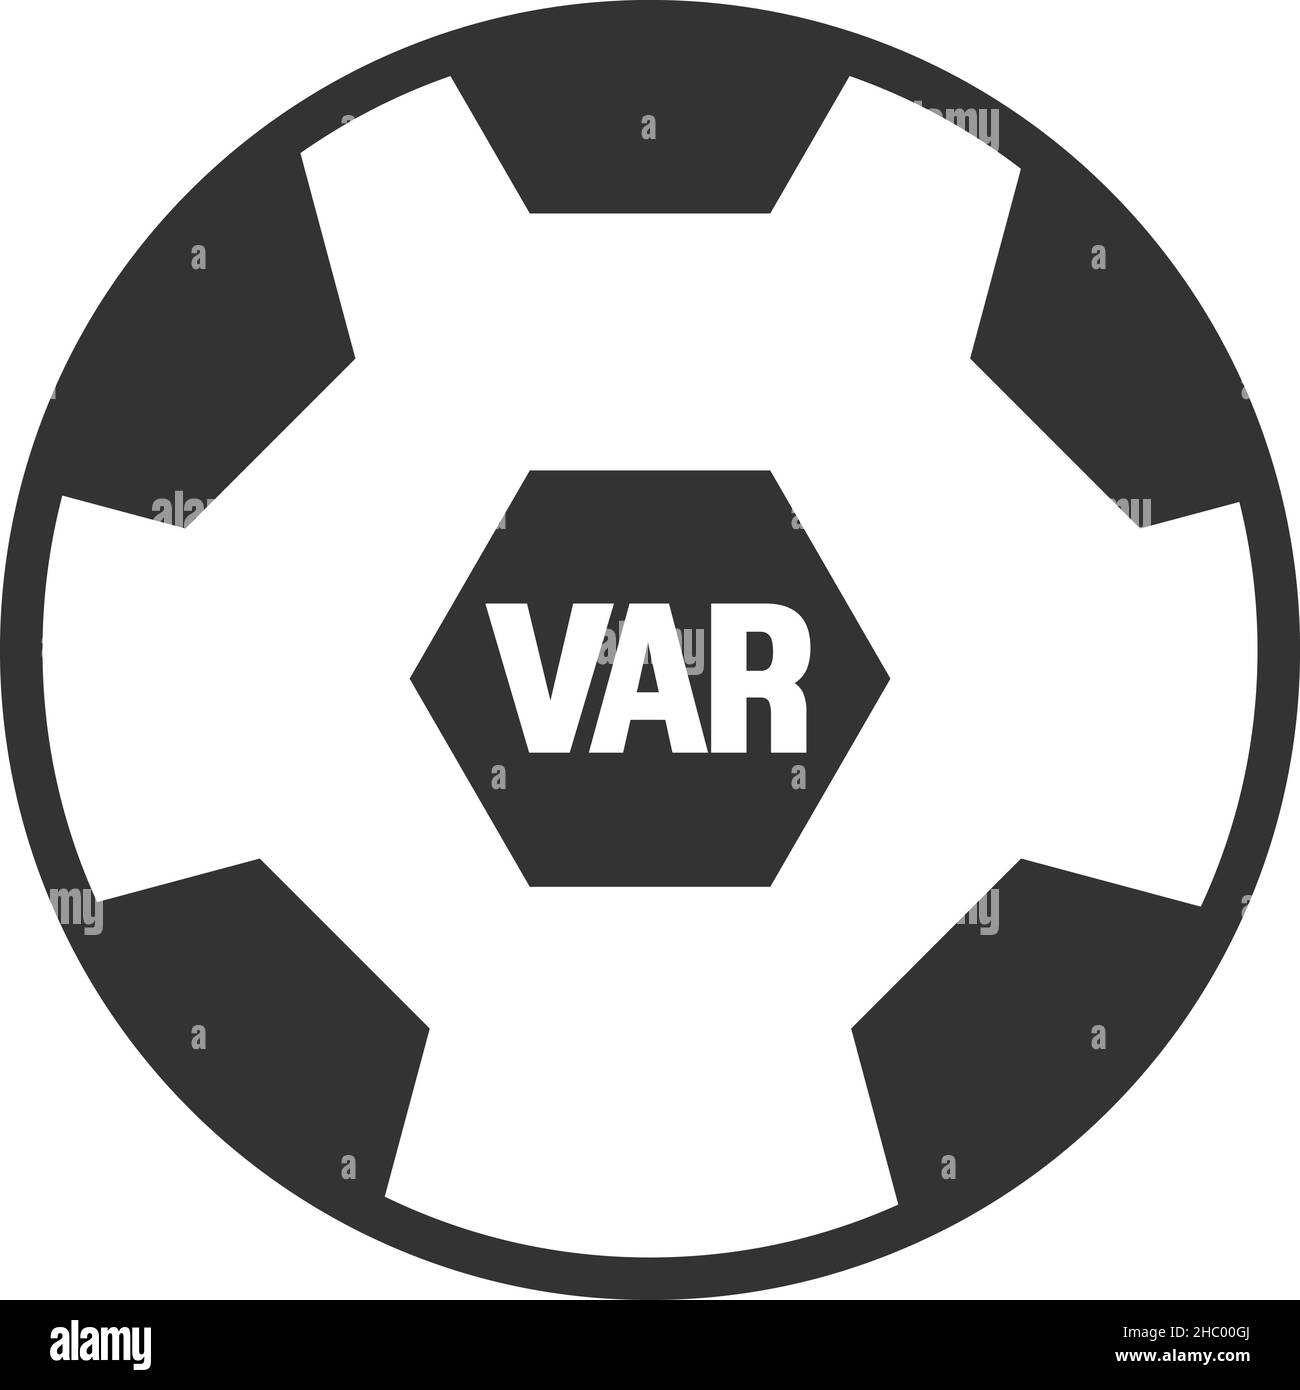 VAR, Video Assistant Referee icon / VAR logo for soccer or football match, live score, sports on screen or TV